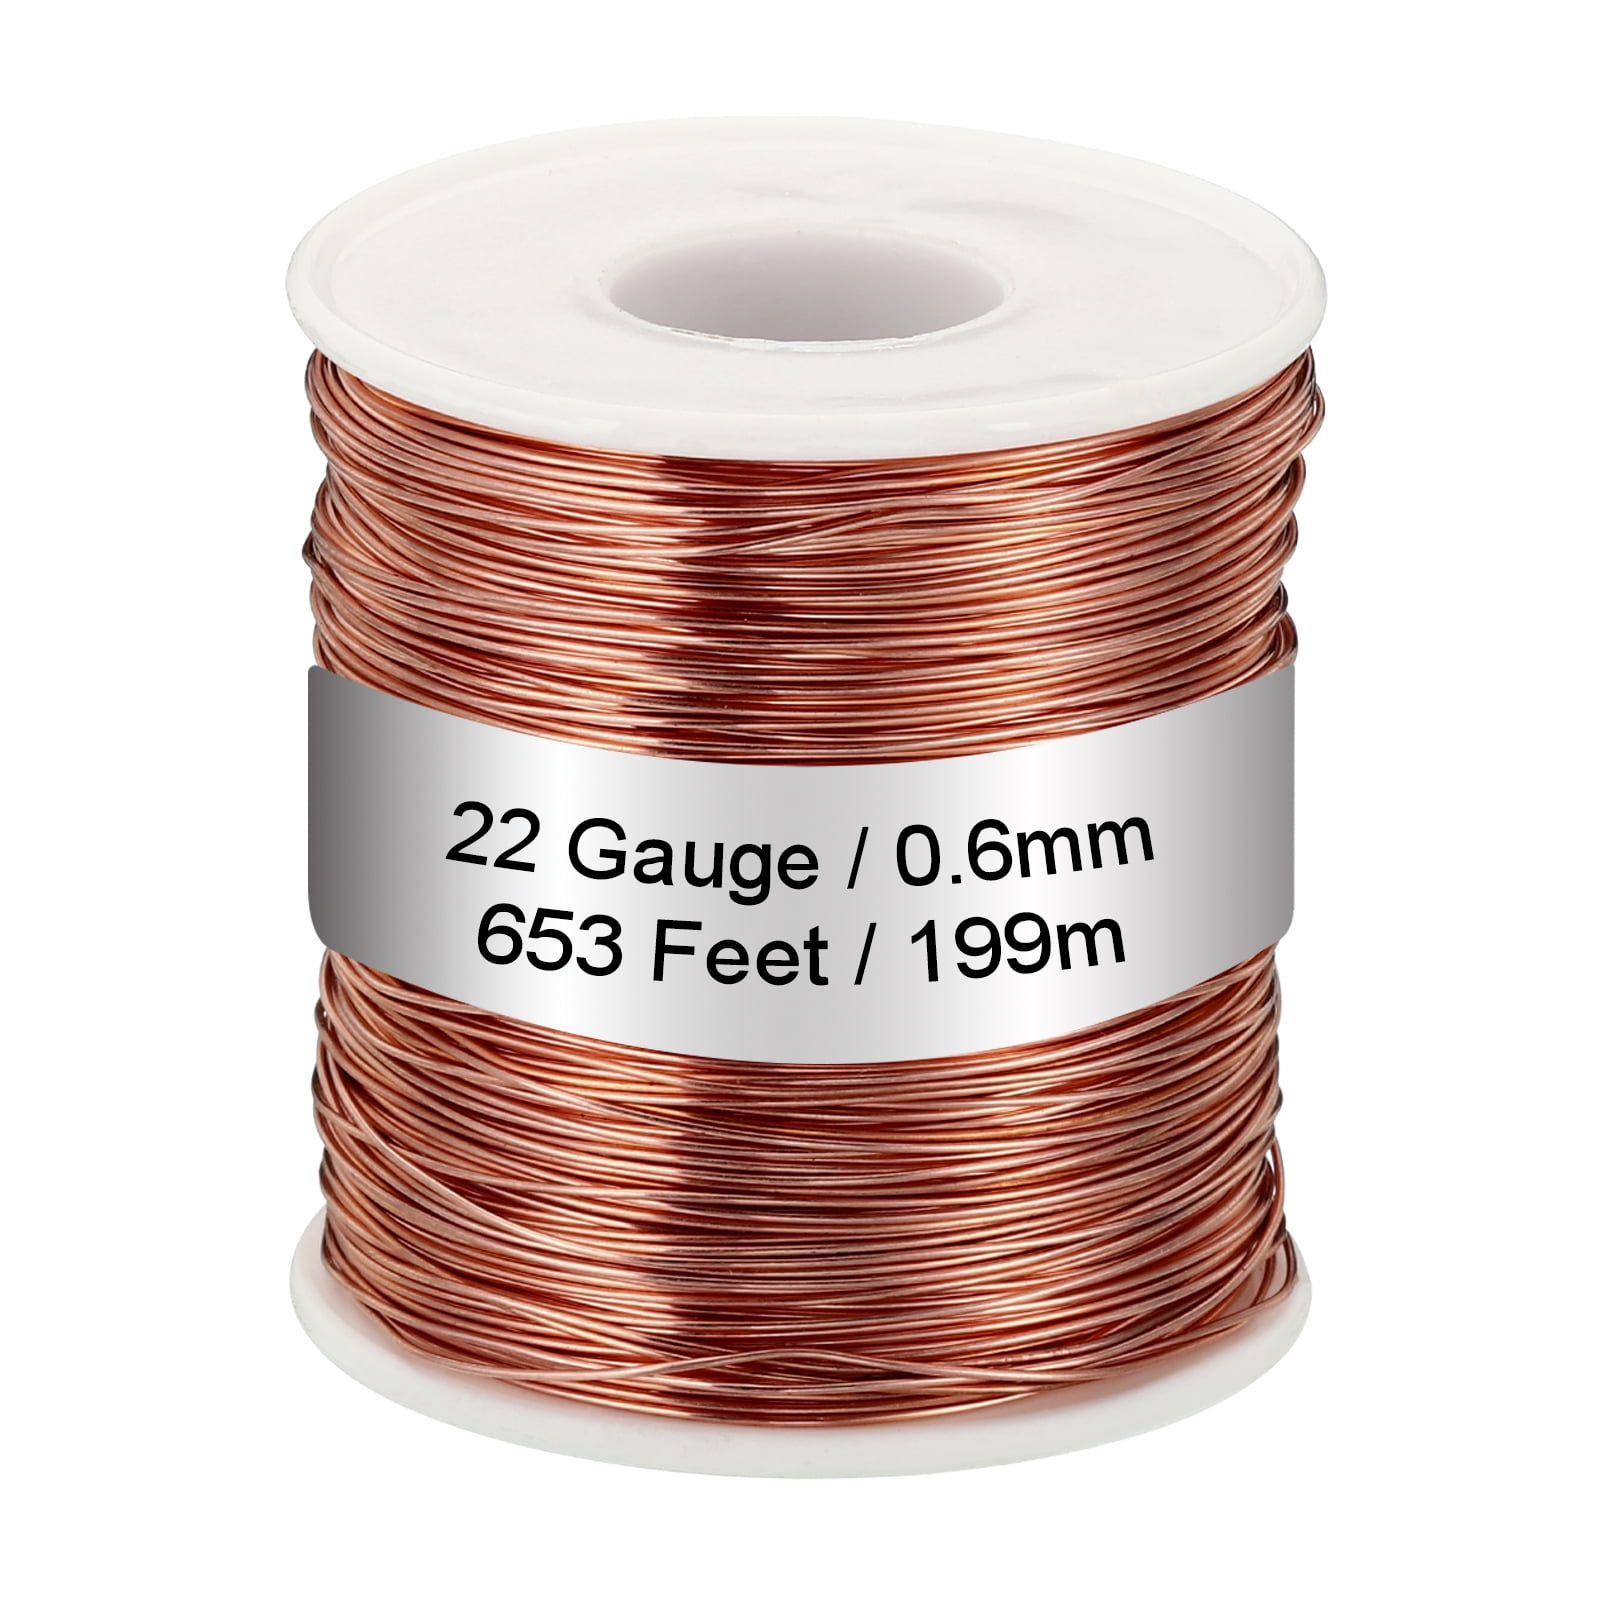 Adornville 99.9% Pure Copper Round Wire Dead Soft 30 Gauge Spool 800 Feet x 0.26mm/0.010 by Eam Jewelry Design & Supply, Llc, Copper